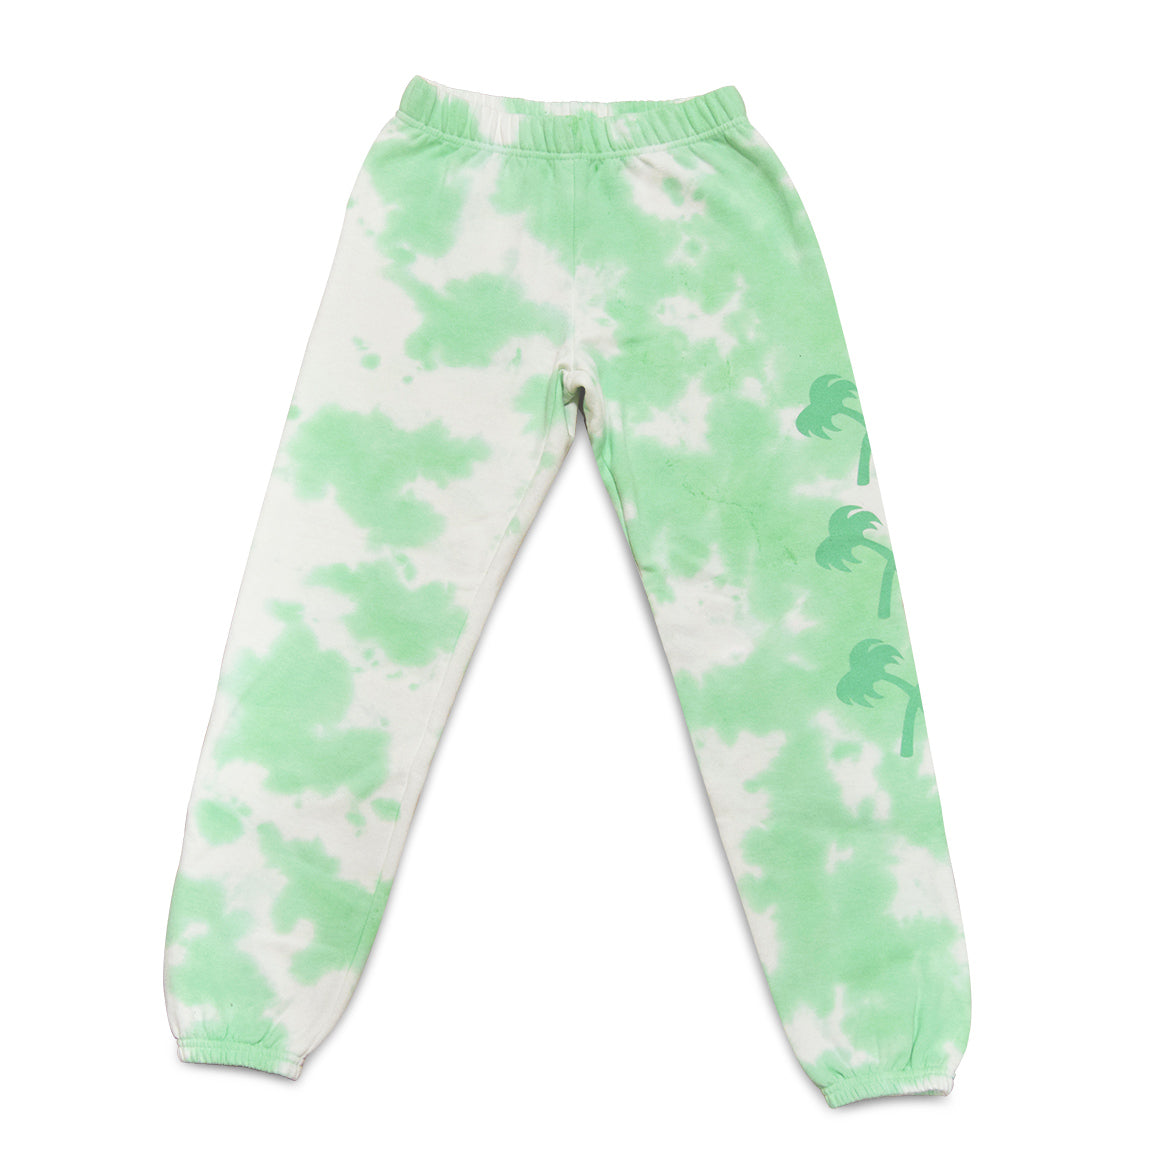 TIE DYE SWEATPANTS – In-N-Out Burger Company Store